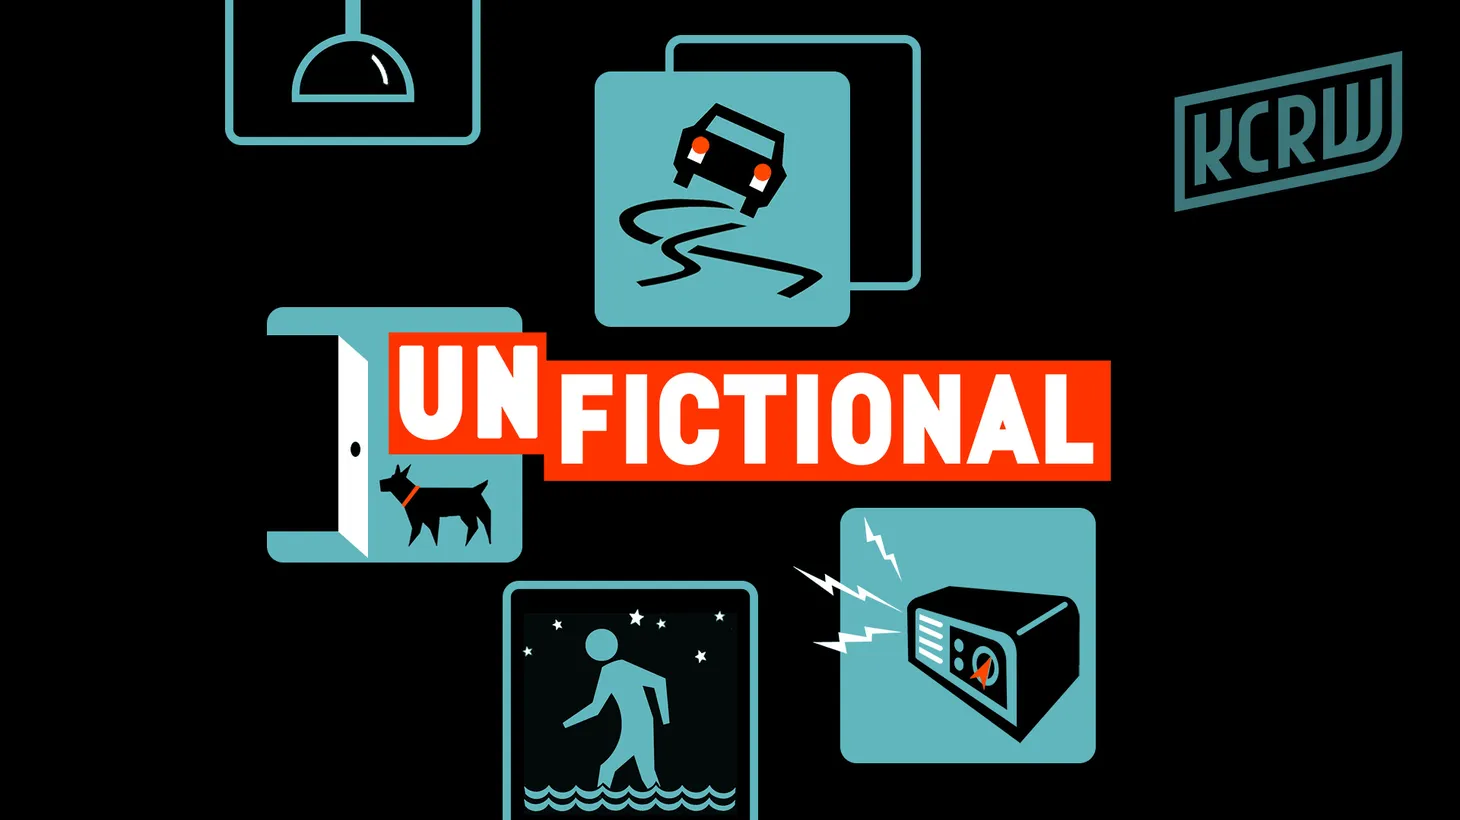 This season on UnFictional, we’re looking at how we come to know the unknown parts of ourselves. Get the first episode January 31st.